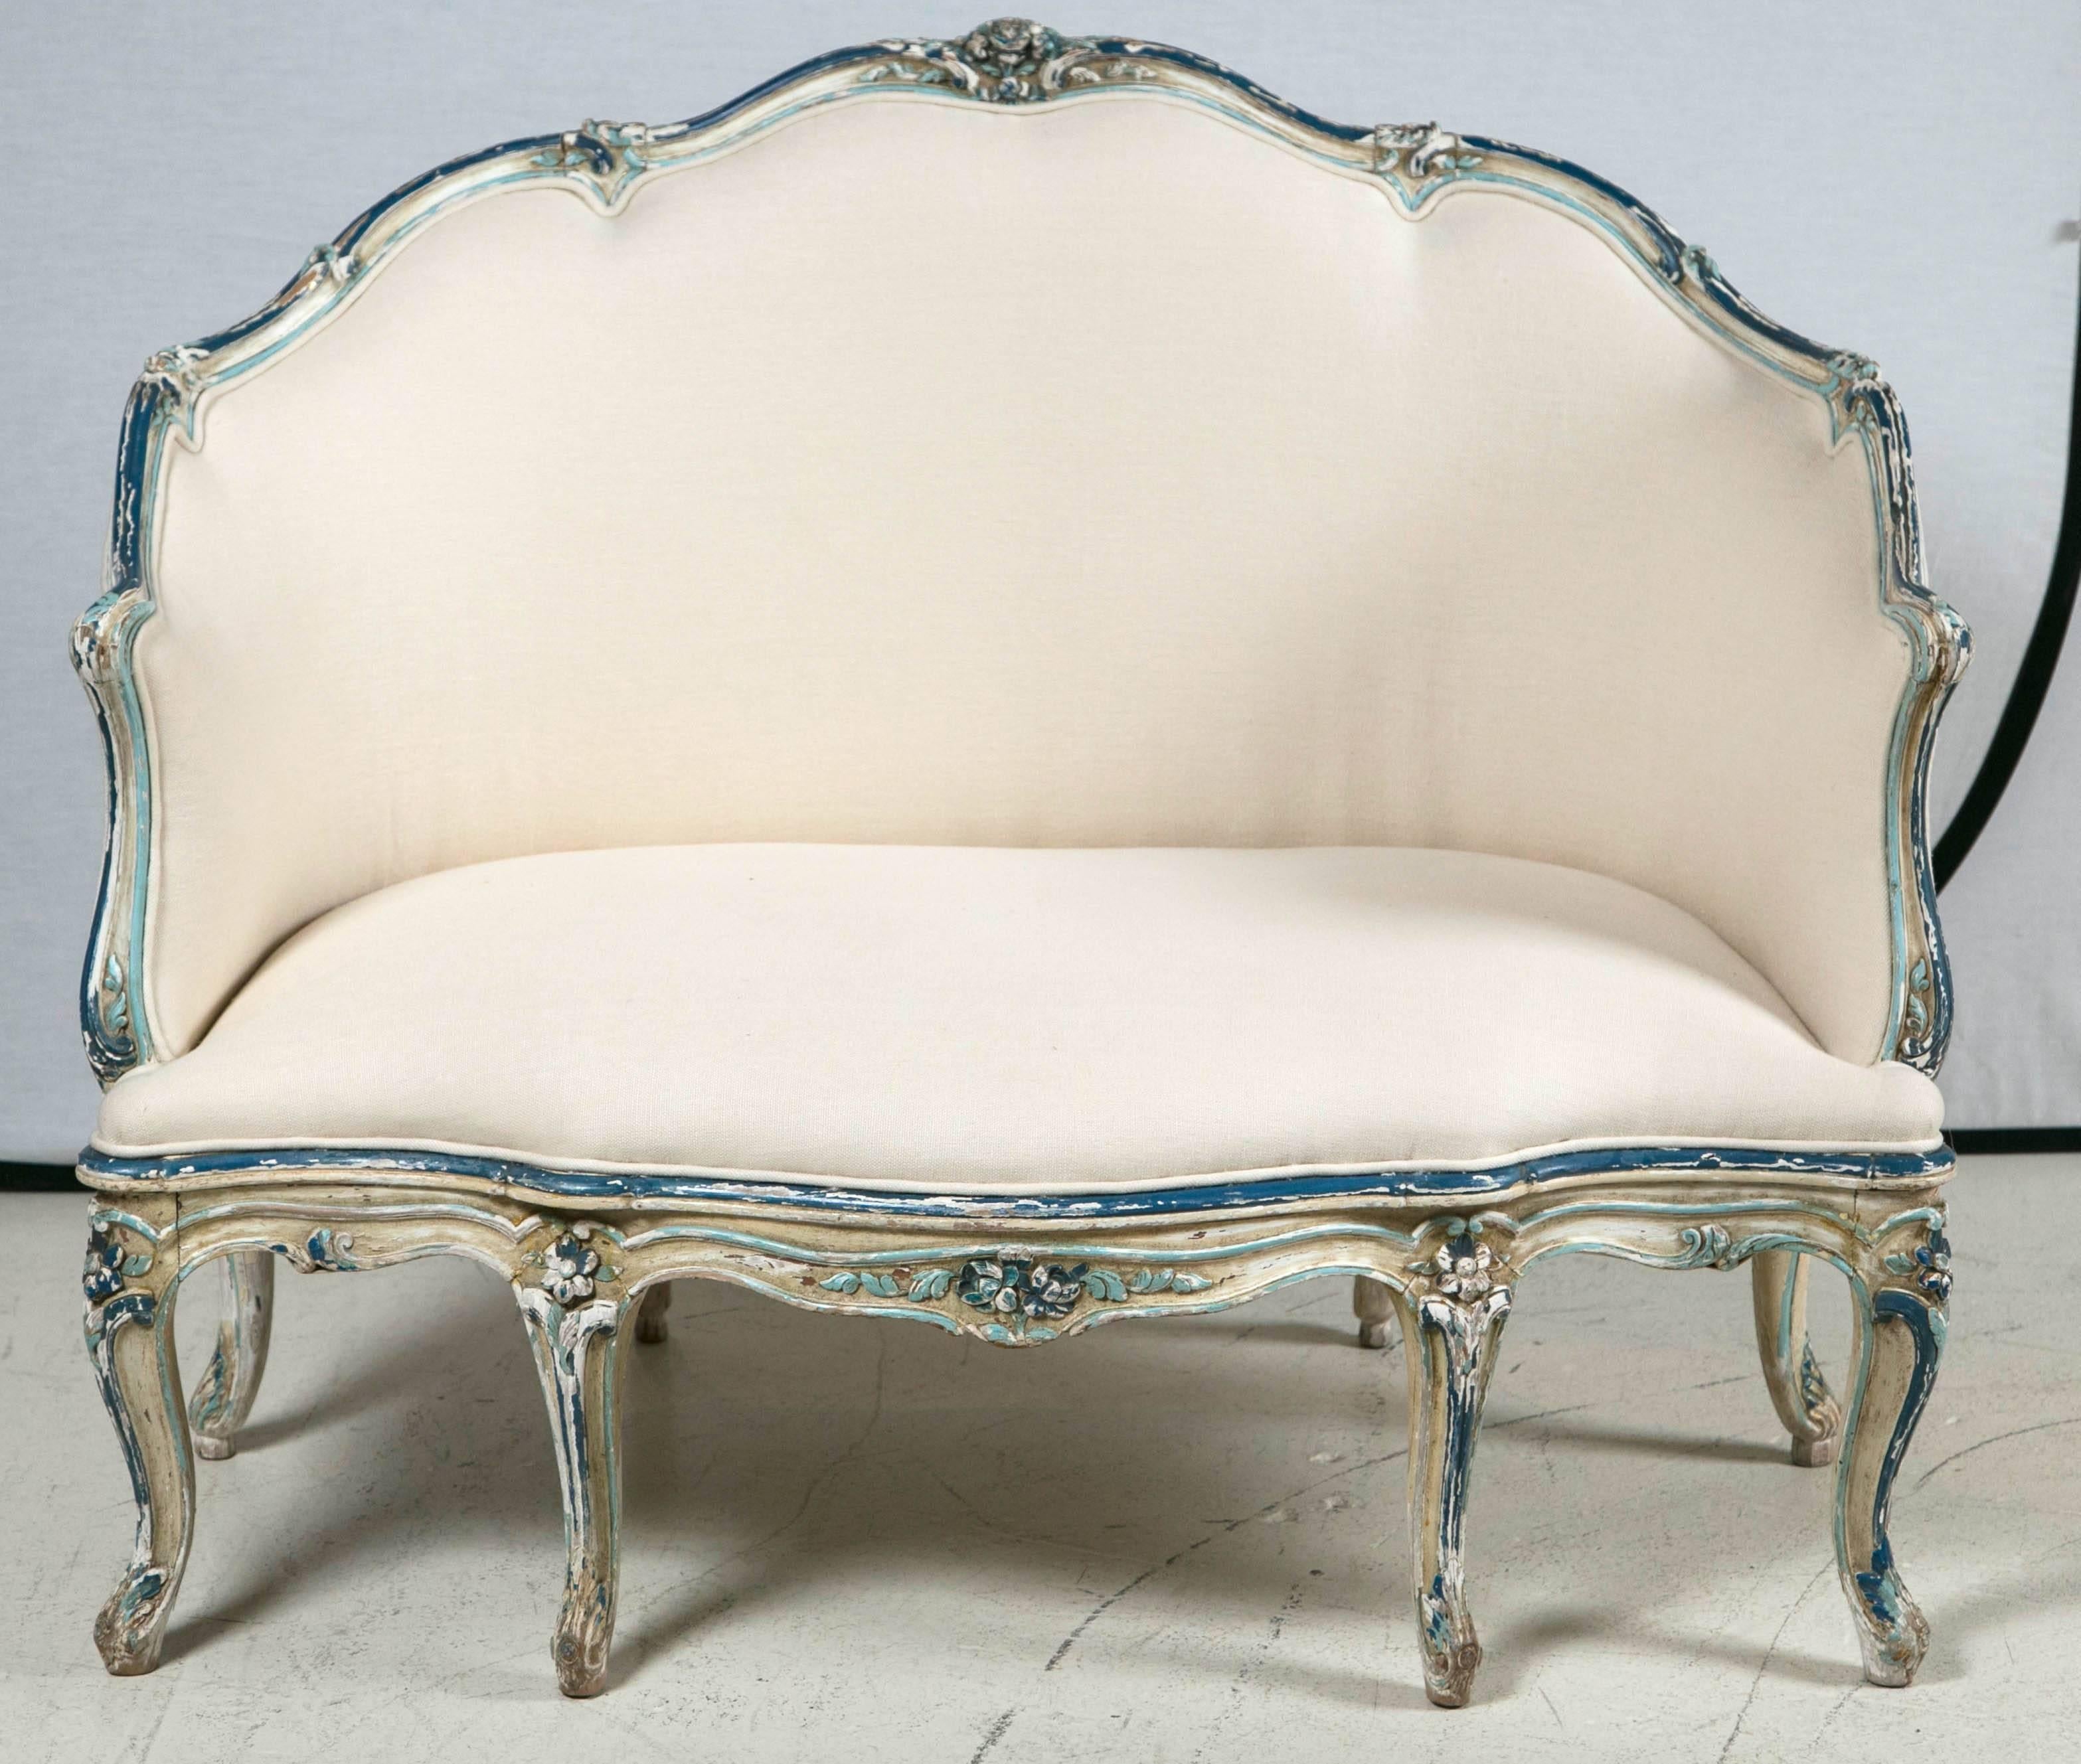 Hand-carved and painted in blue hues. Newly upholstered.